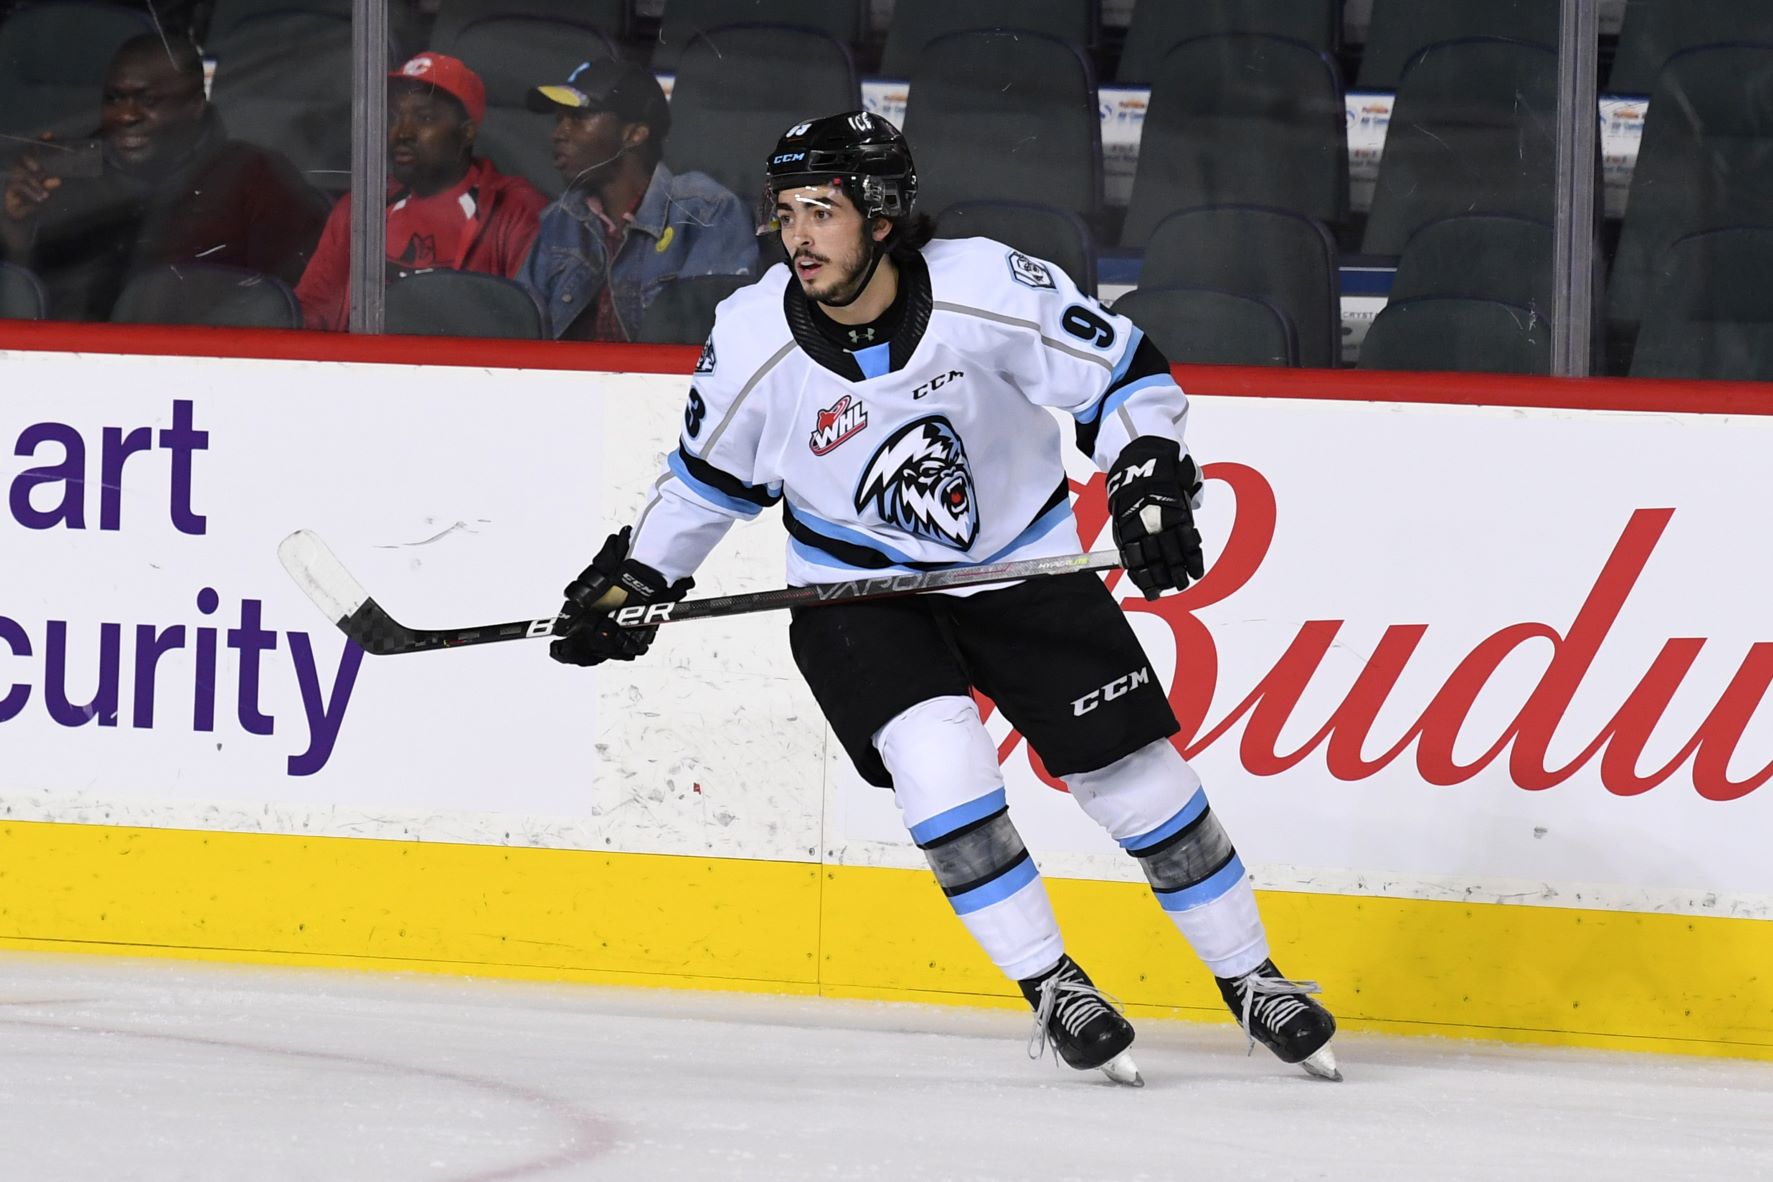 Matthew Beniers: A Quick-Rising Forward With Strong Defensive